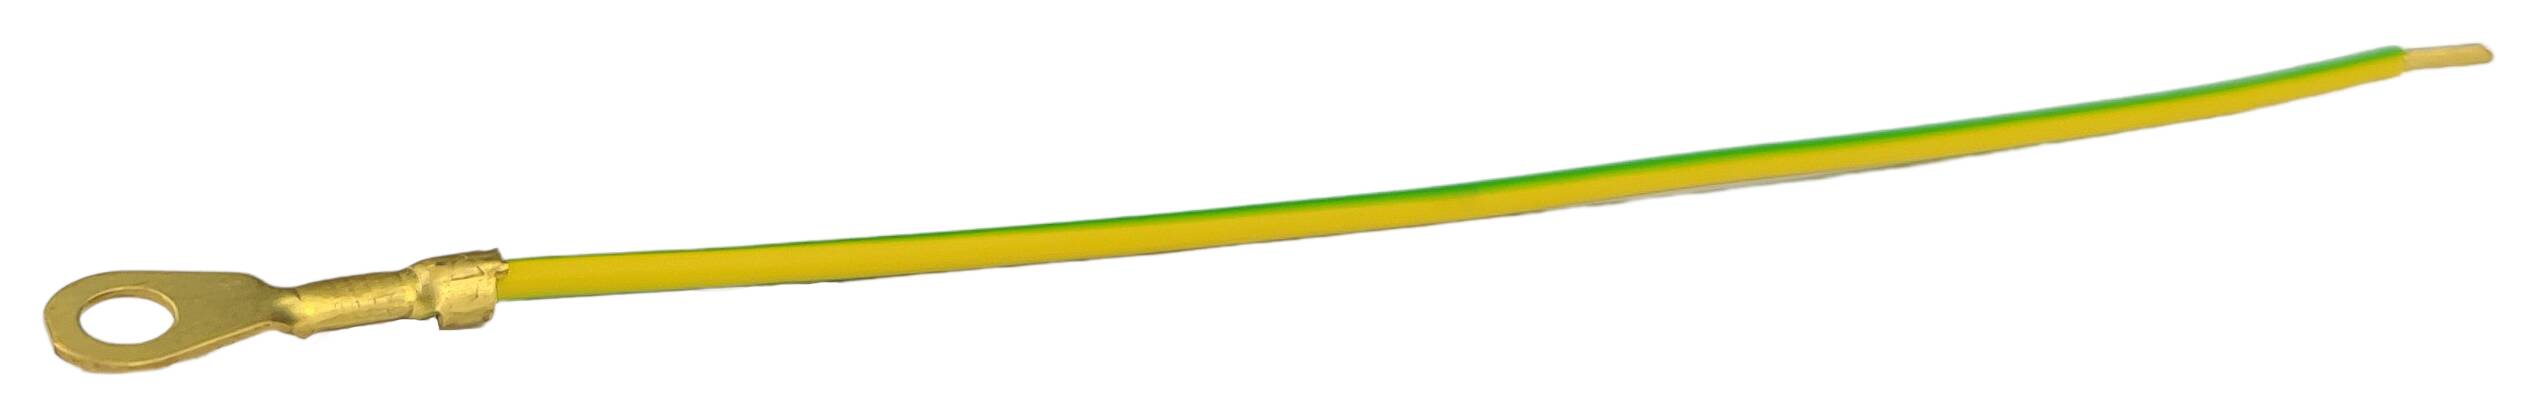 stranded wire section 1x0,75 H05V-K 150 mm long with loop M4/ ferrule green-yellow